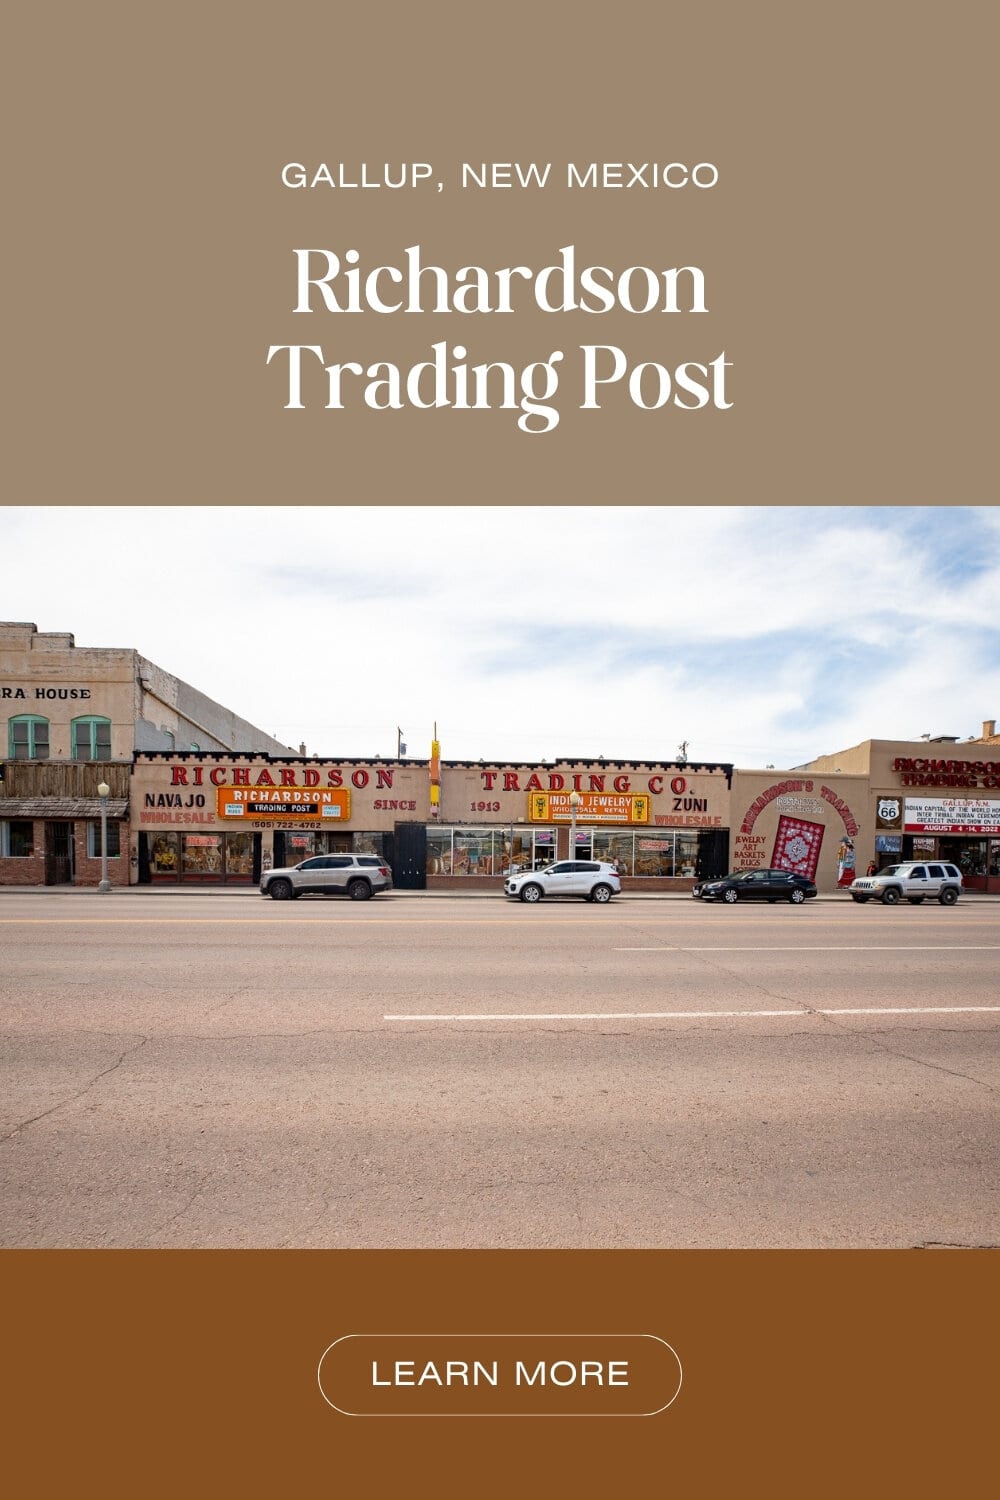 You can find many trading posts across New Mexico Route 66. But one of the oldest, and most well known, is Richardson Trading Post in Gallup, New Mexico. Located right on the main street of historic Route 66, Richardson Trading Post opened in 1913, predating the Mother Road by more than a decade. The trading post and pawn shop hosts an impressive selection of Native American Arts, Navajo rugs, turquoise jewelry, and other wares. #Route66 #Route66RoadTrip #GallupNewMexico #NewMexico